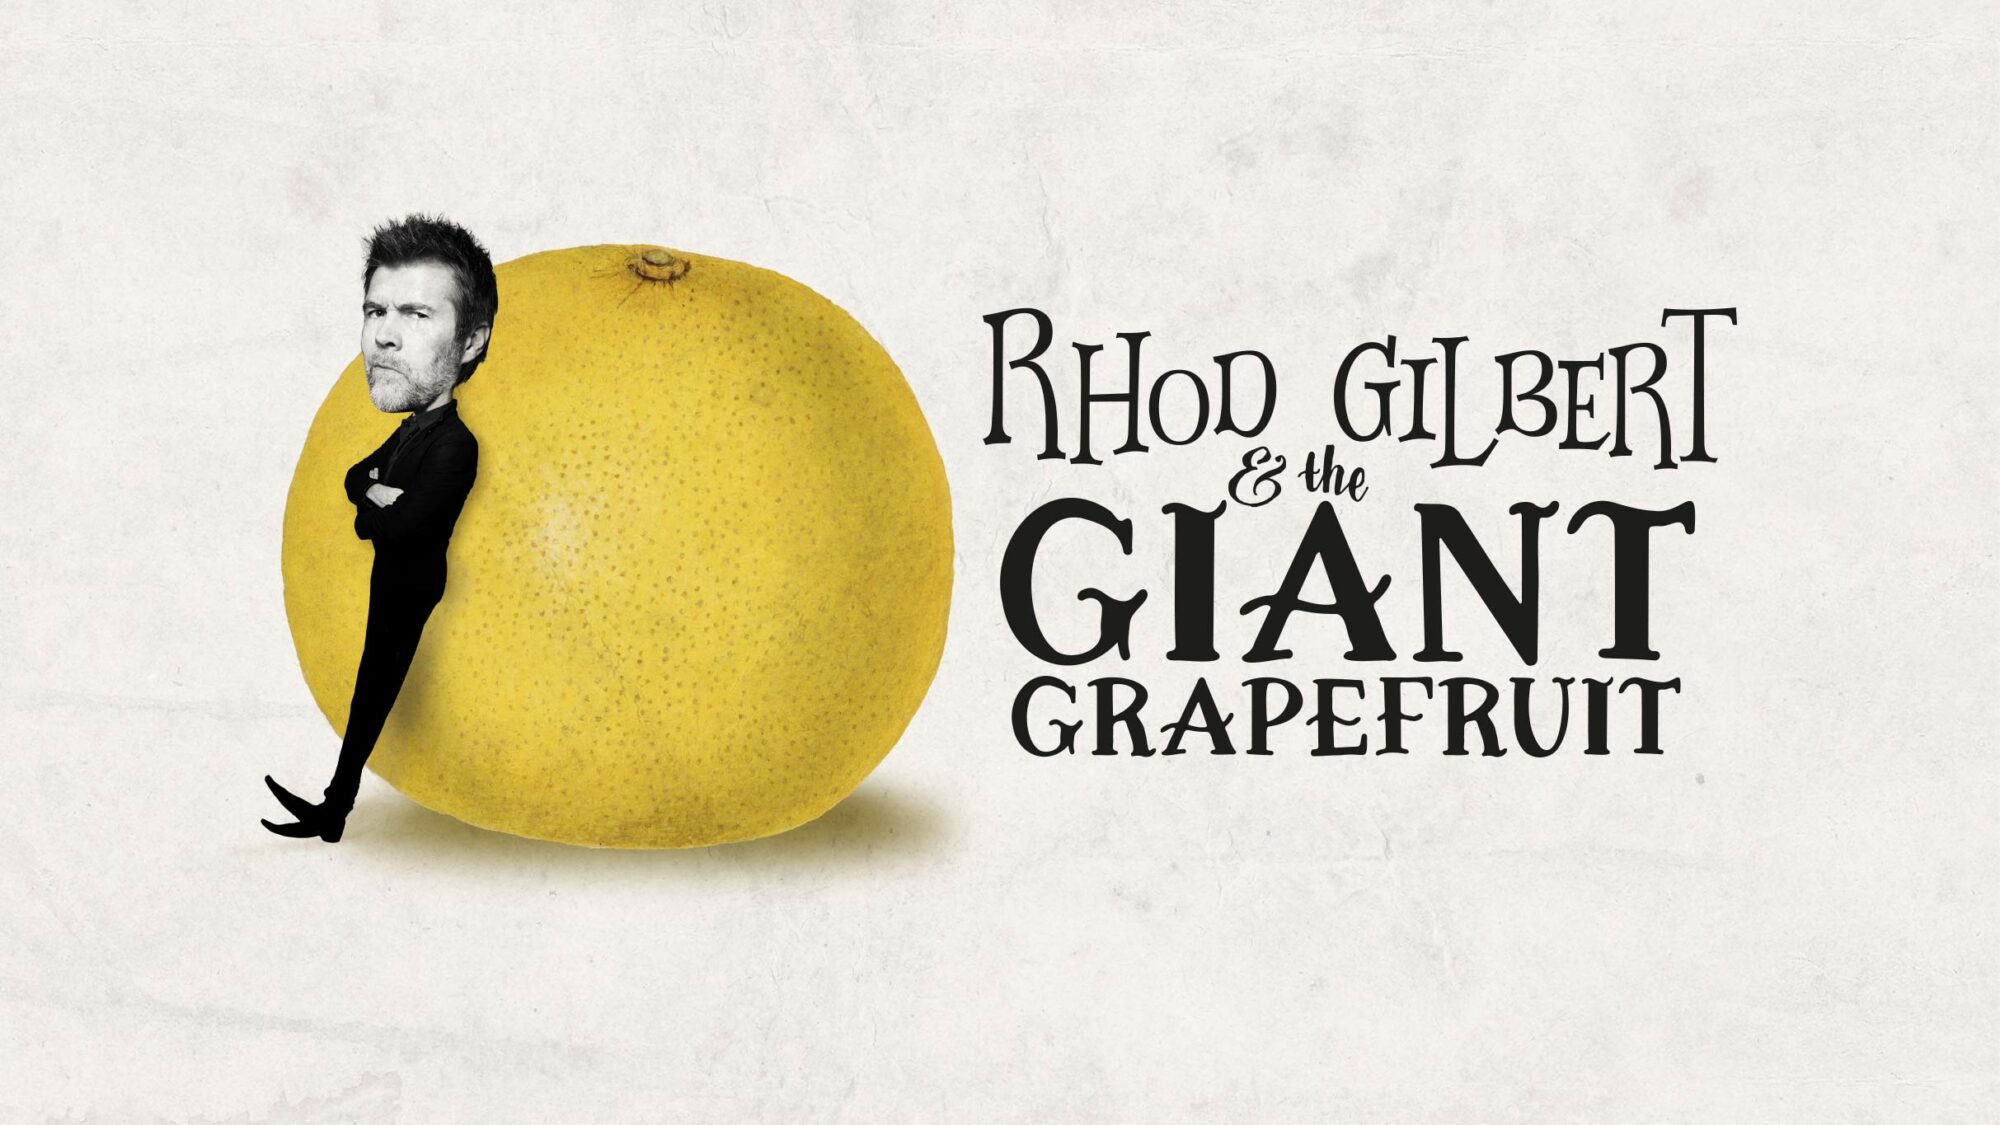 Image name Rhod Gilbert The Giant Grapefruit at Doncaster Dome Doncaster the 4 image from the post Rhod Gilbert & The Giant Grapefruit at The Royal Hall, Harrogate in Yorkshire.com.